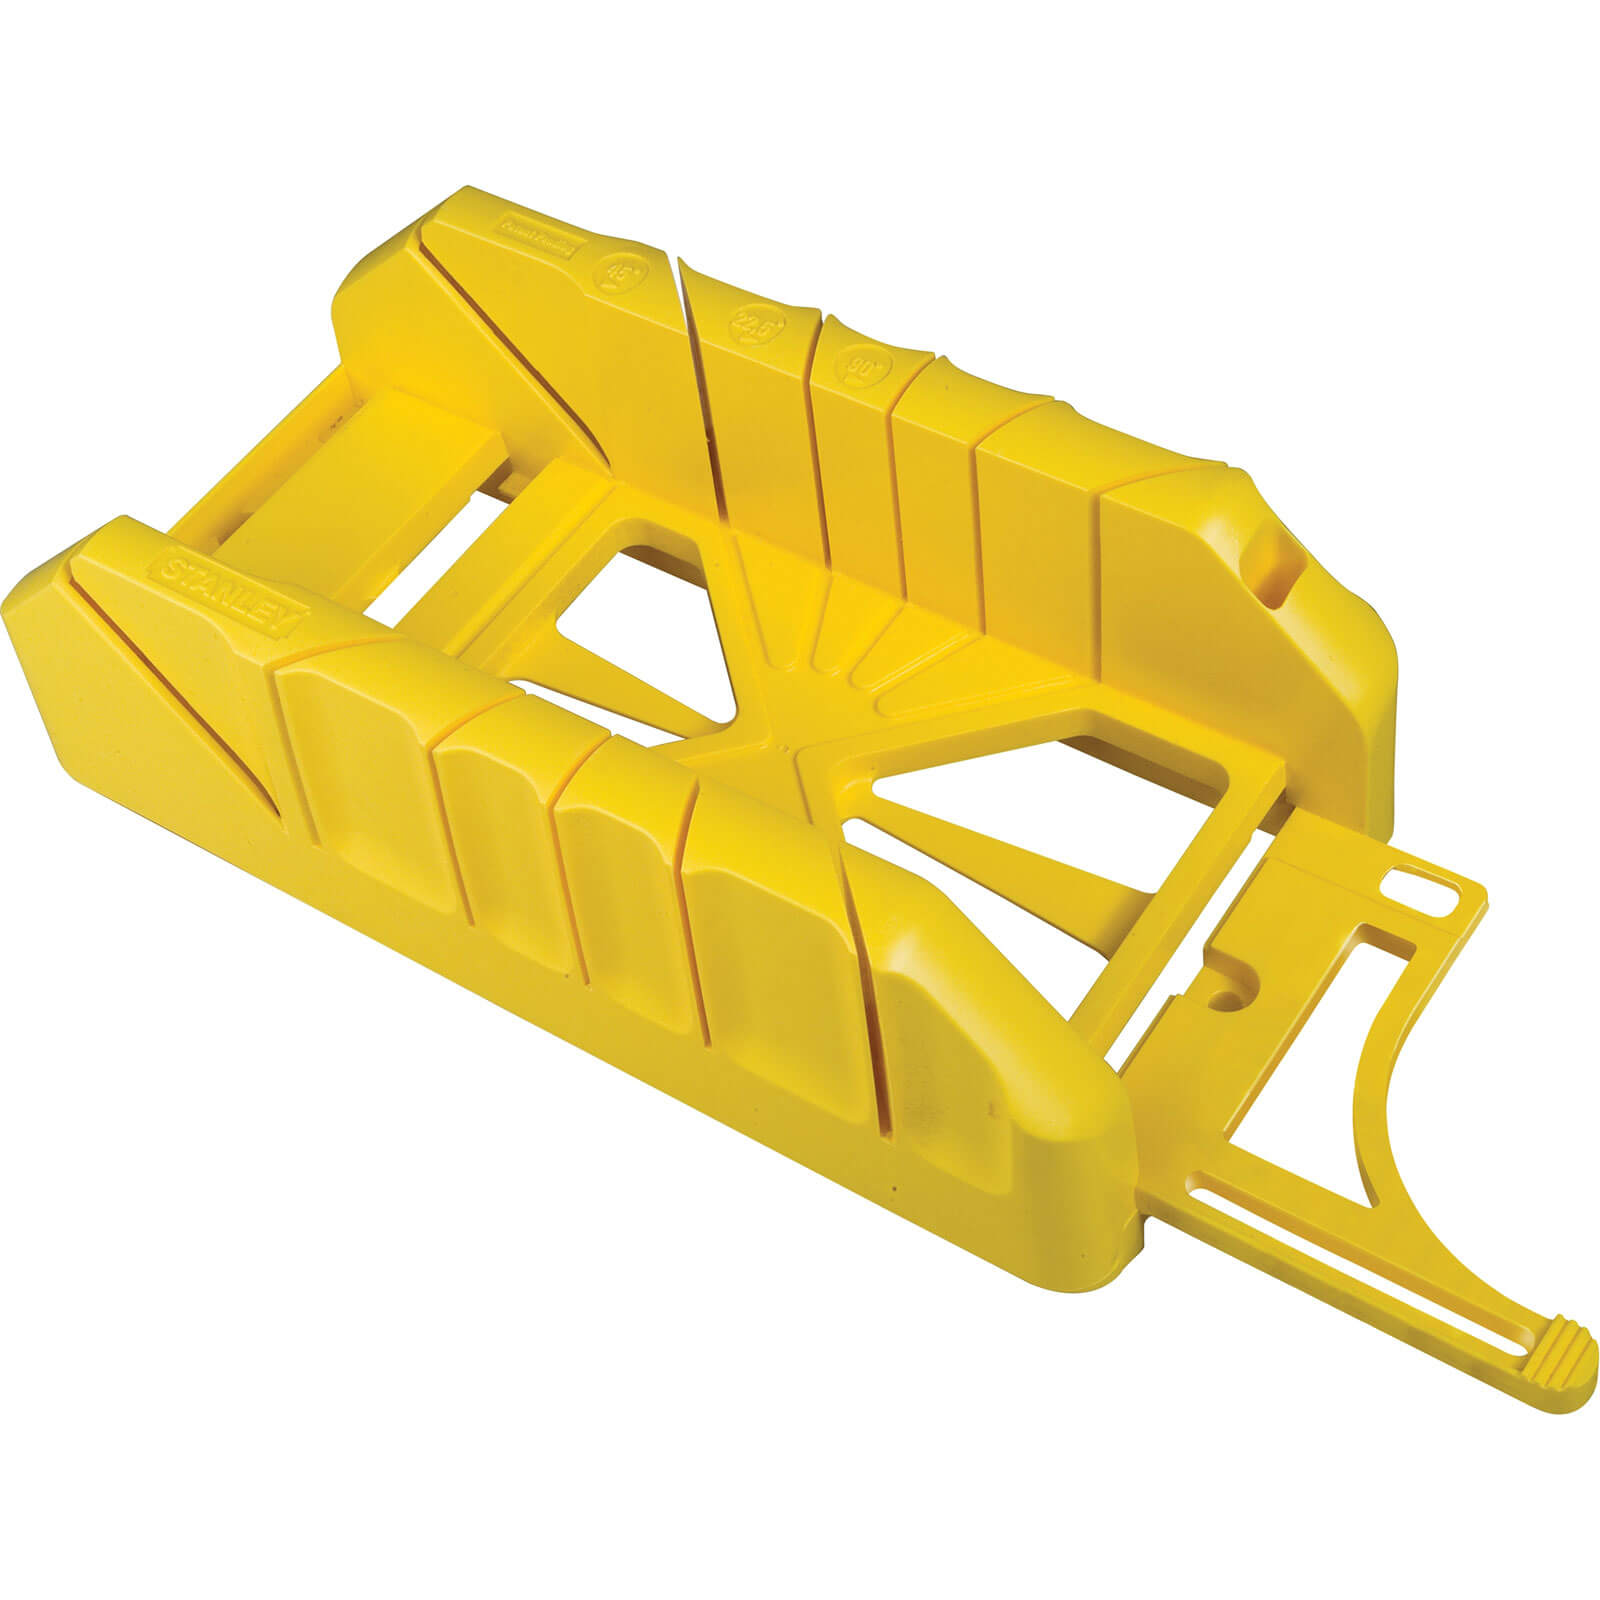 Photo of Stanley Mitre Box 300mm